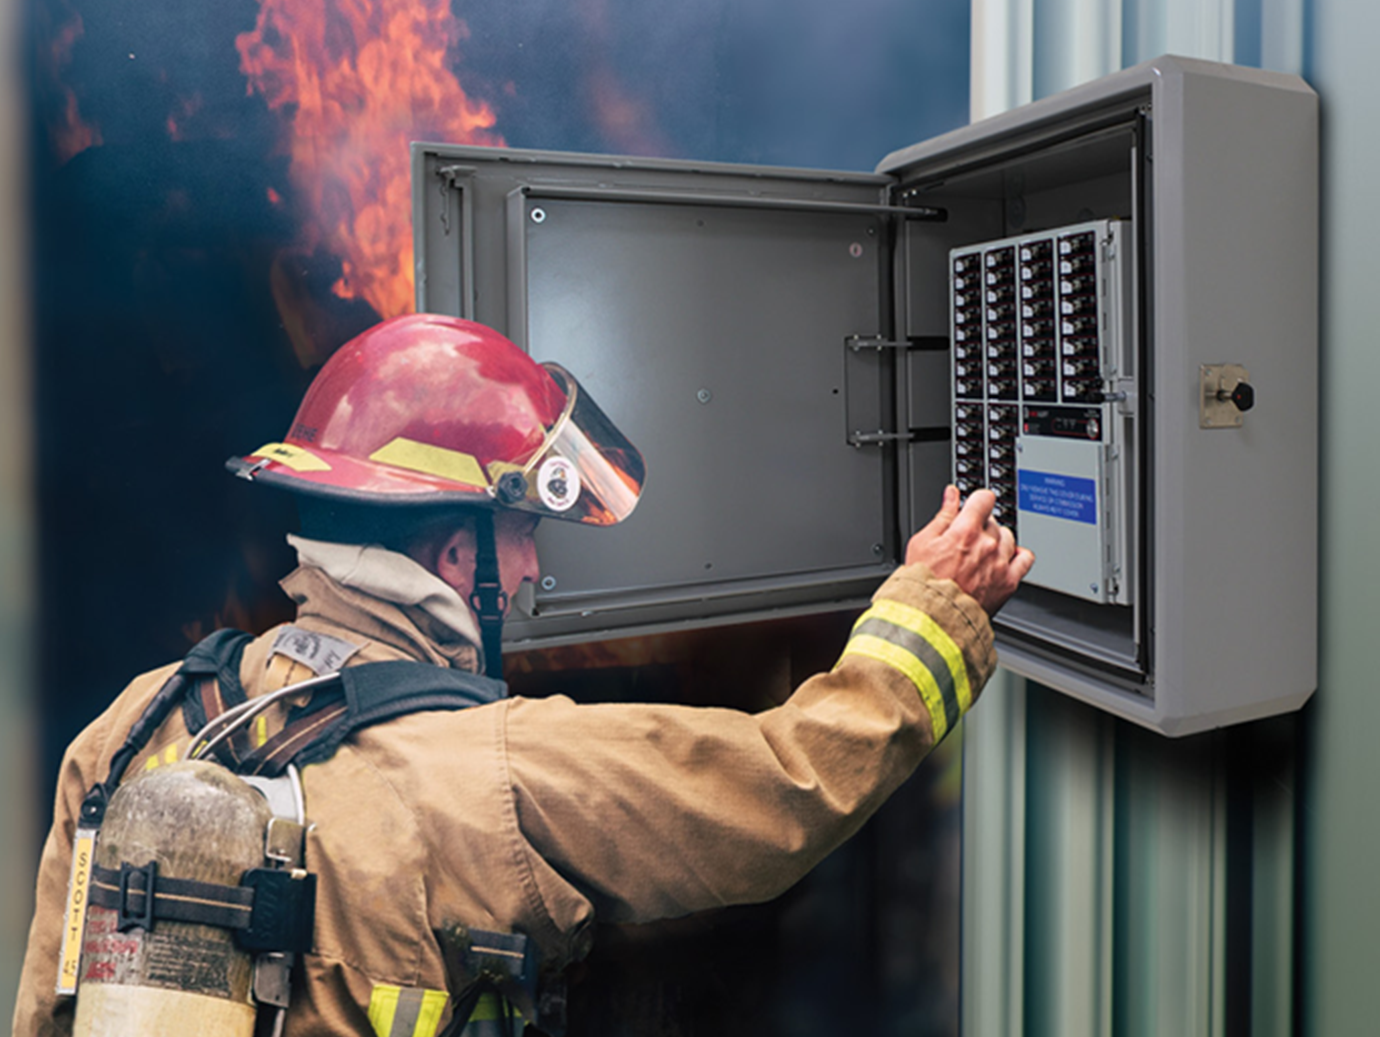 A firefighter operating a box